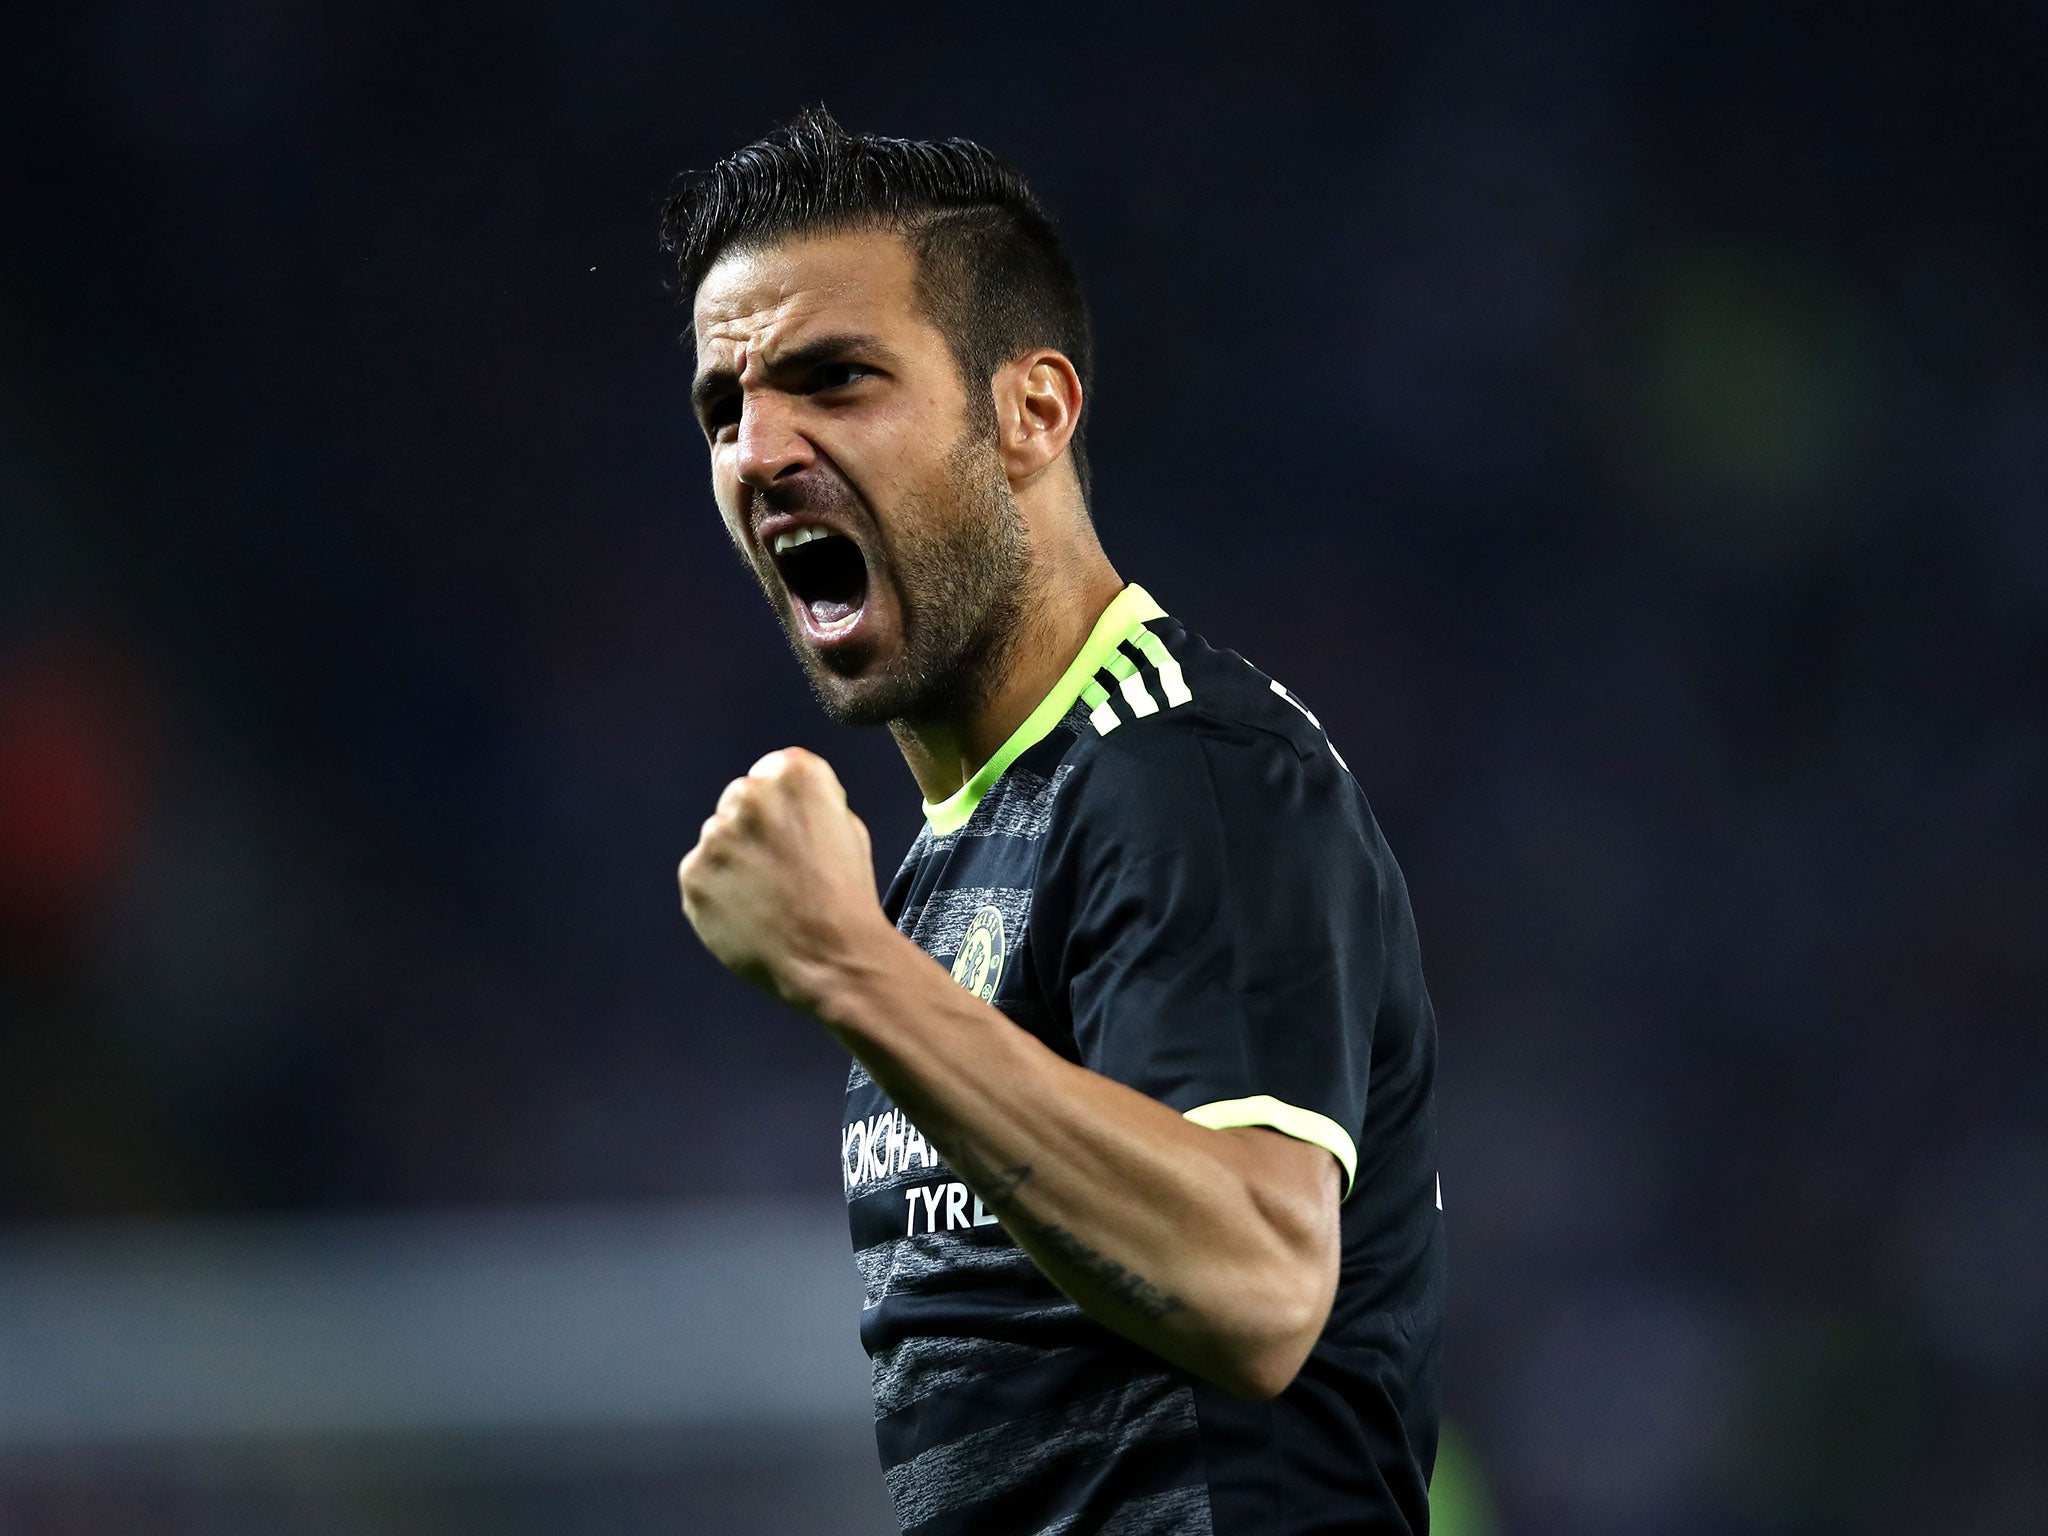 Cesc Fabregas made the difference in Chelsea's recent 4-2 victory against Leicester in the EFL Cup